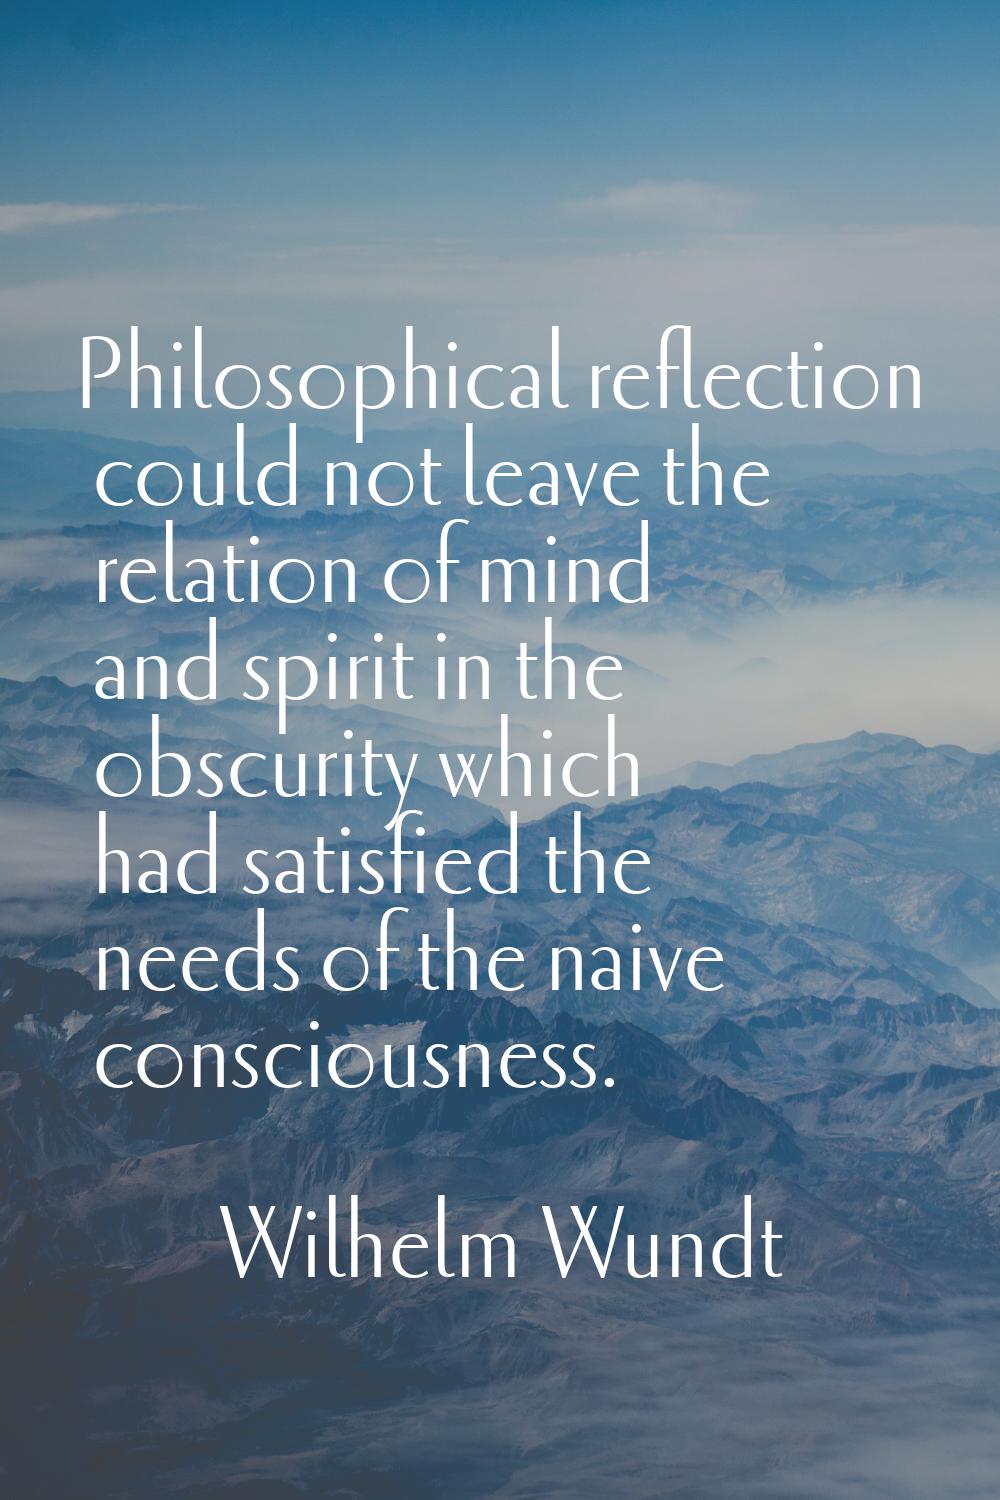 Philosophical reflection could not leave the relation of mind and spirit in the obscurity which had